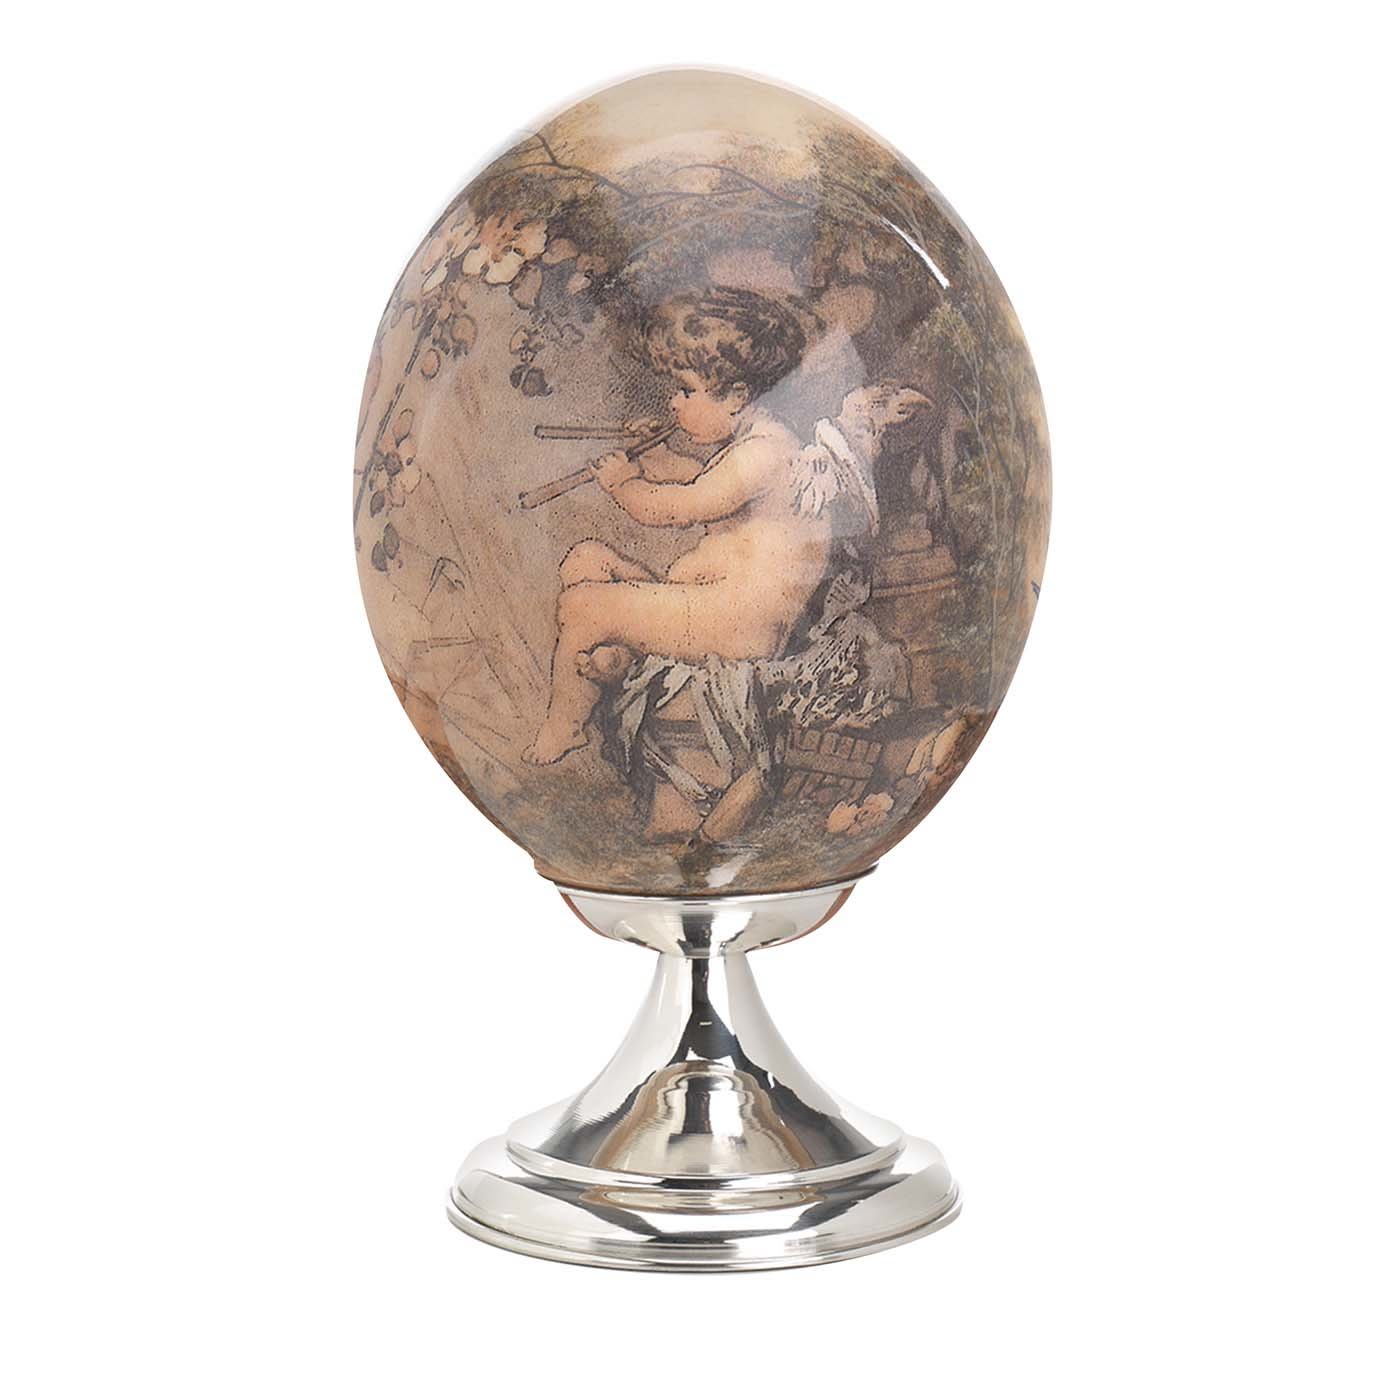 Ostrich Egg with Angels Decoration - L’argento Firenze